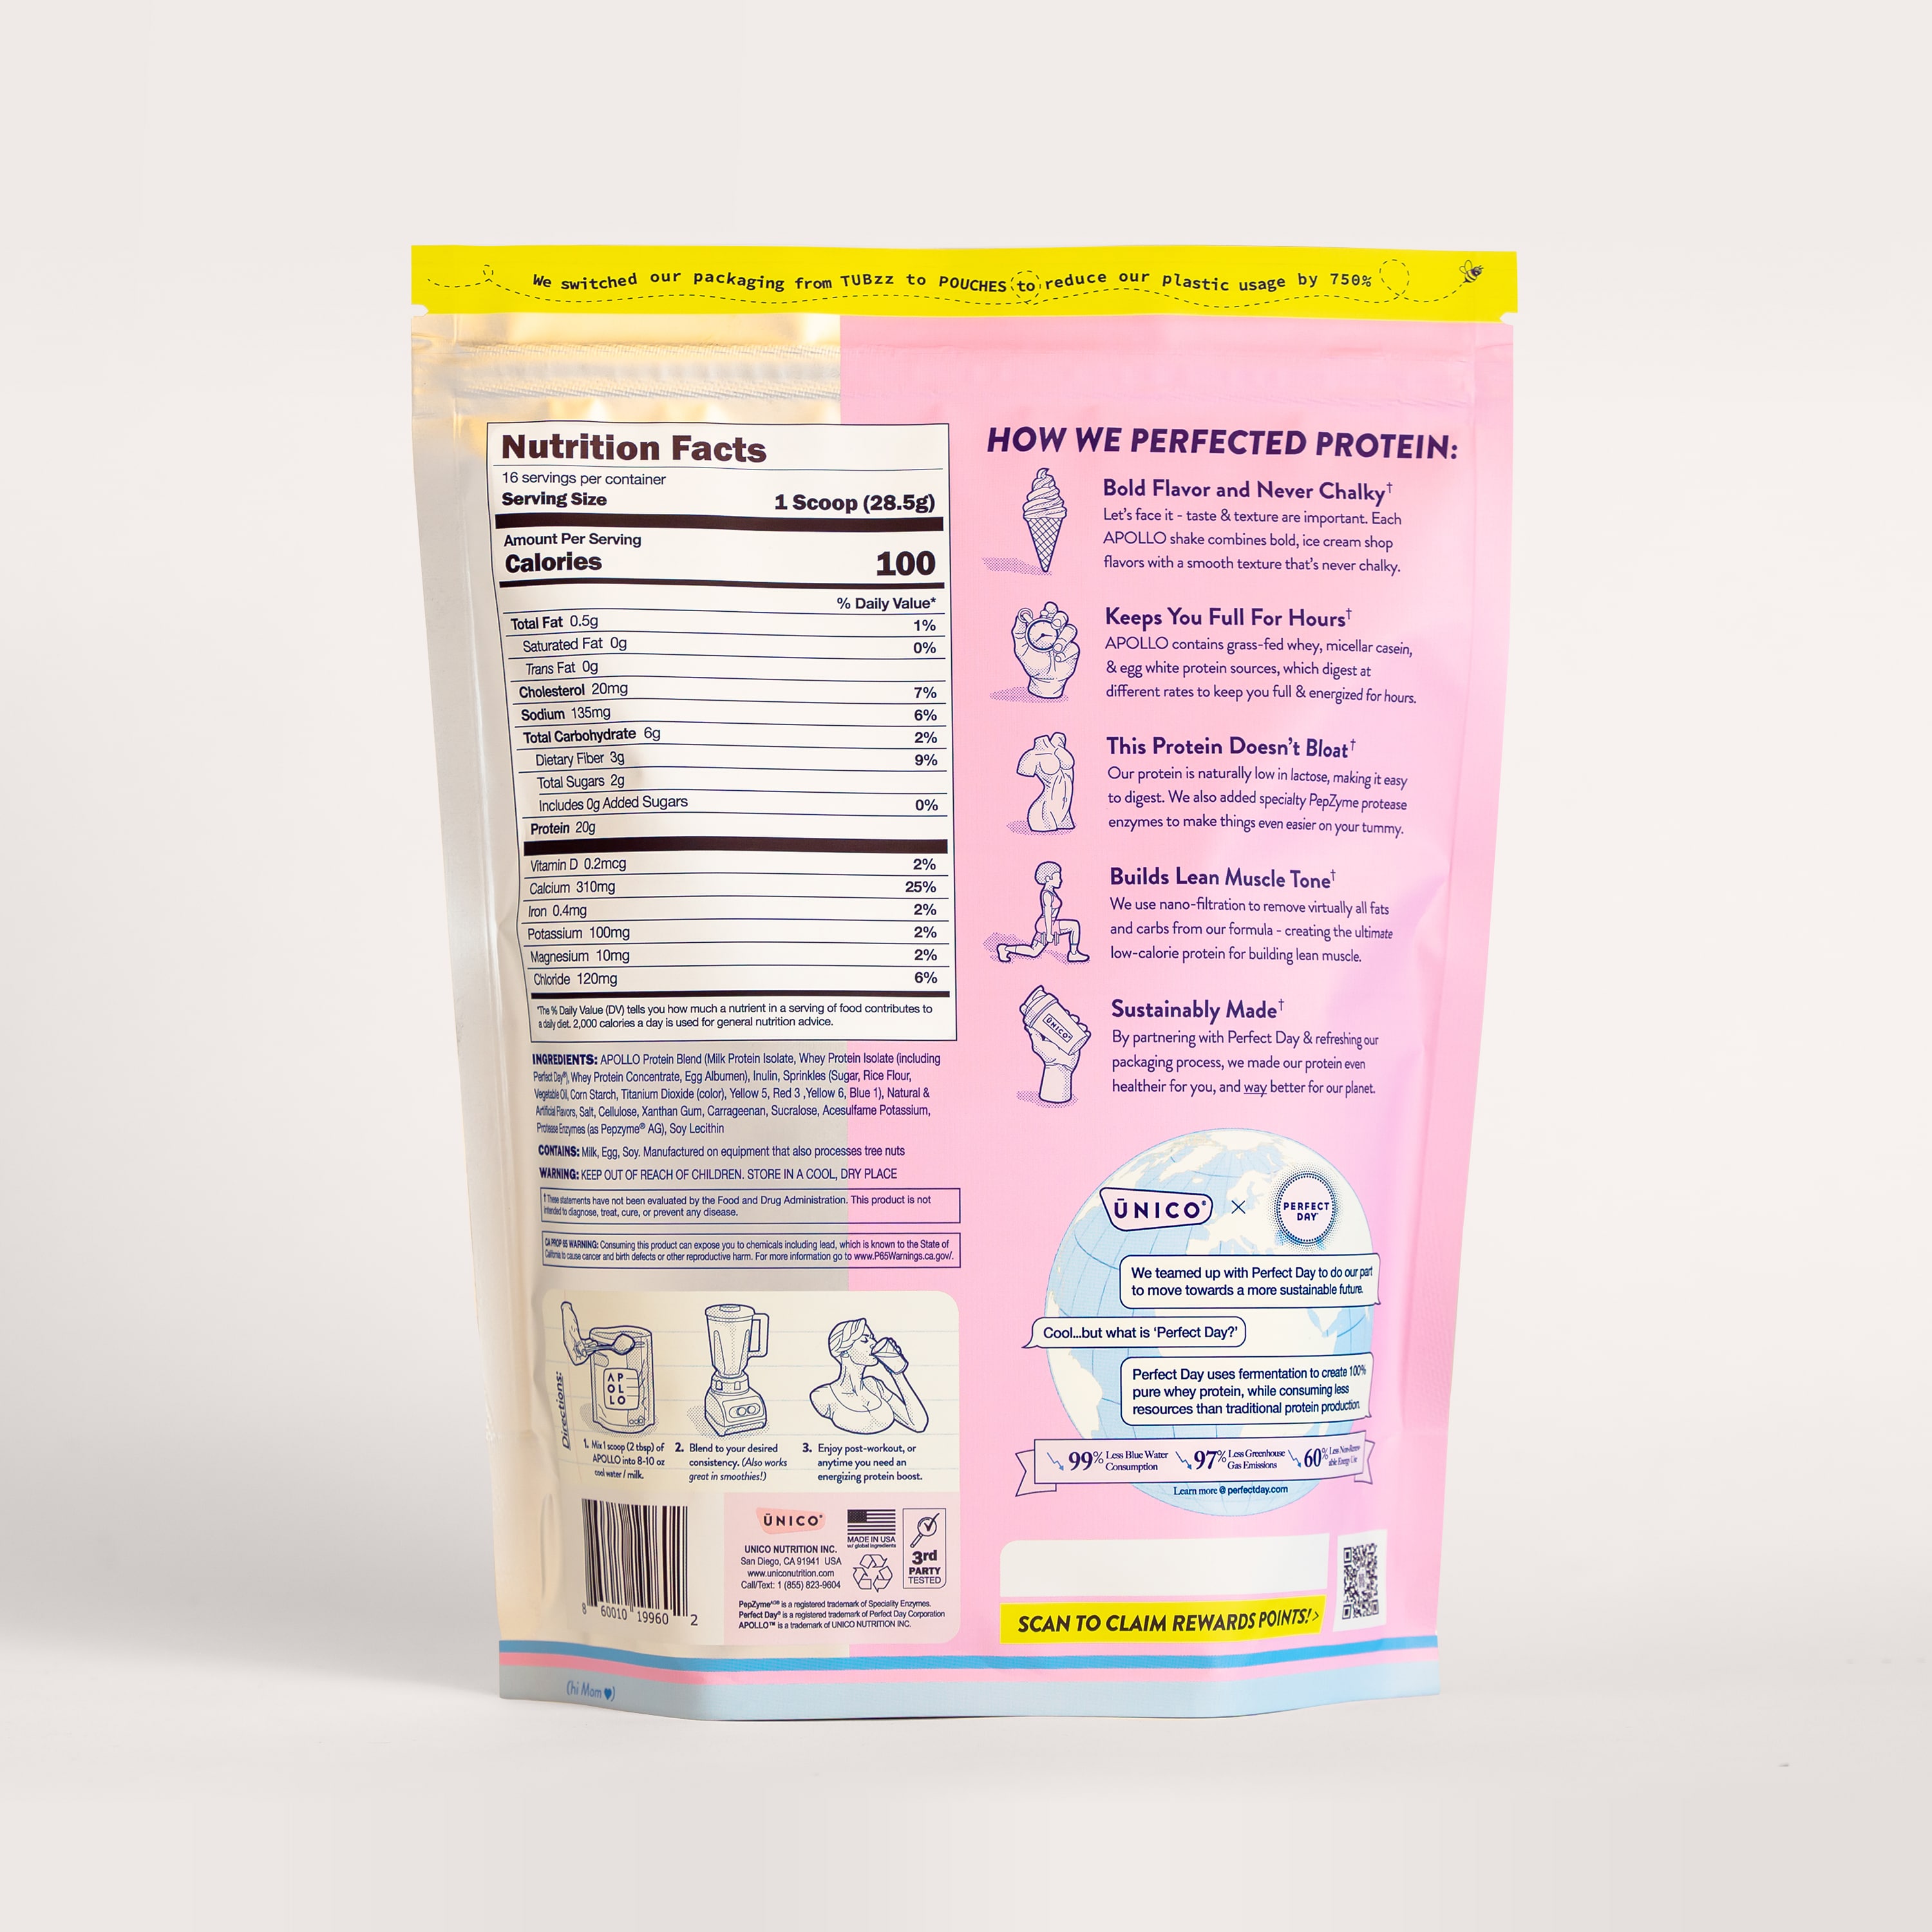 unico apollo birthday cake protein powder - back view of packaging with details on ingredients and nutritional information